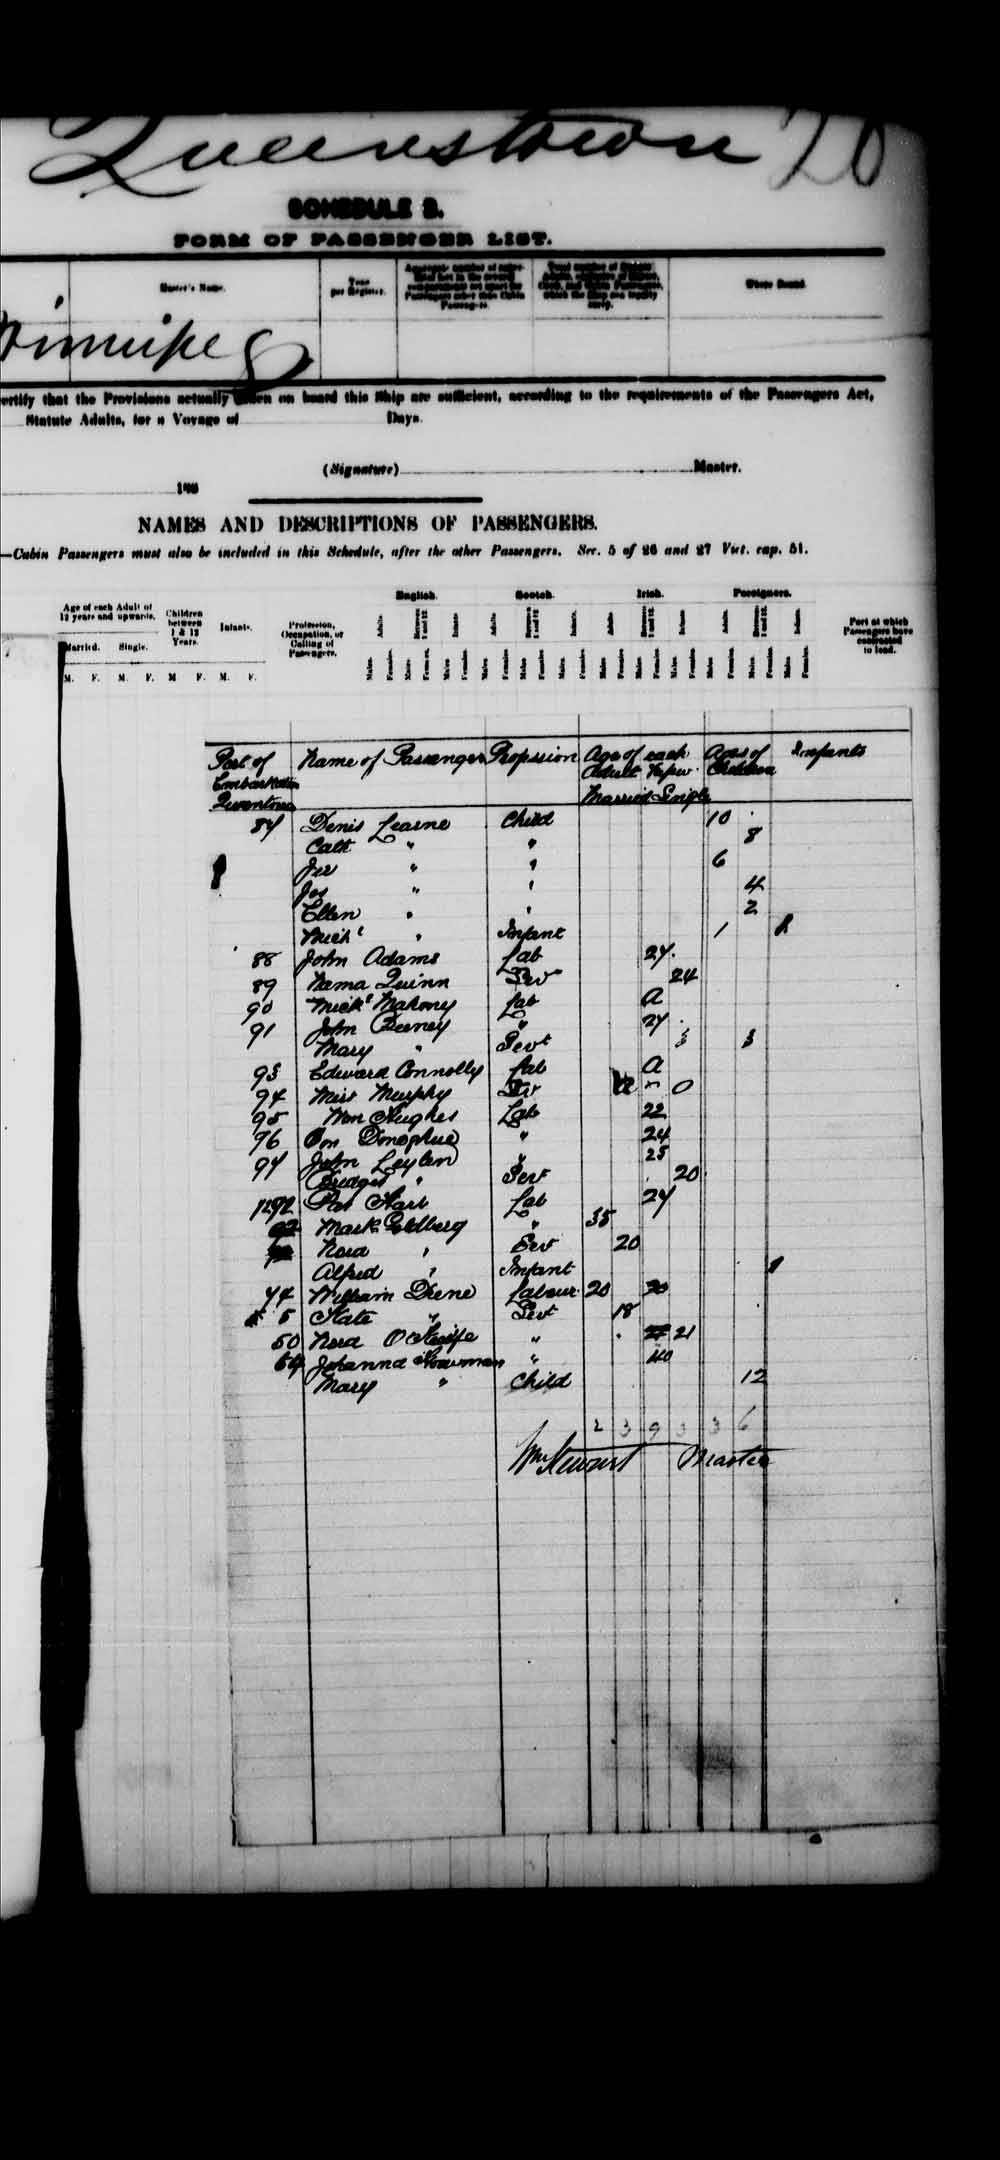 Digitized page of Passenger Lists for Image No.: e003541633